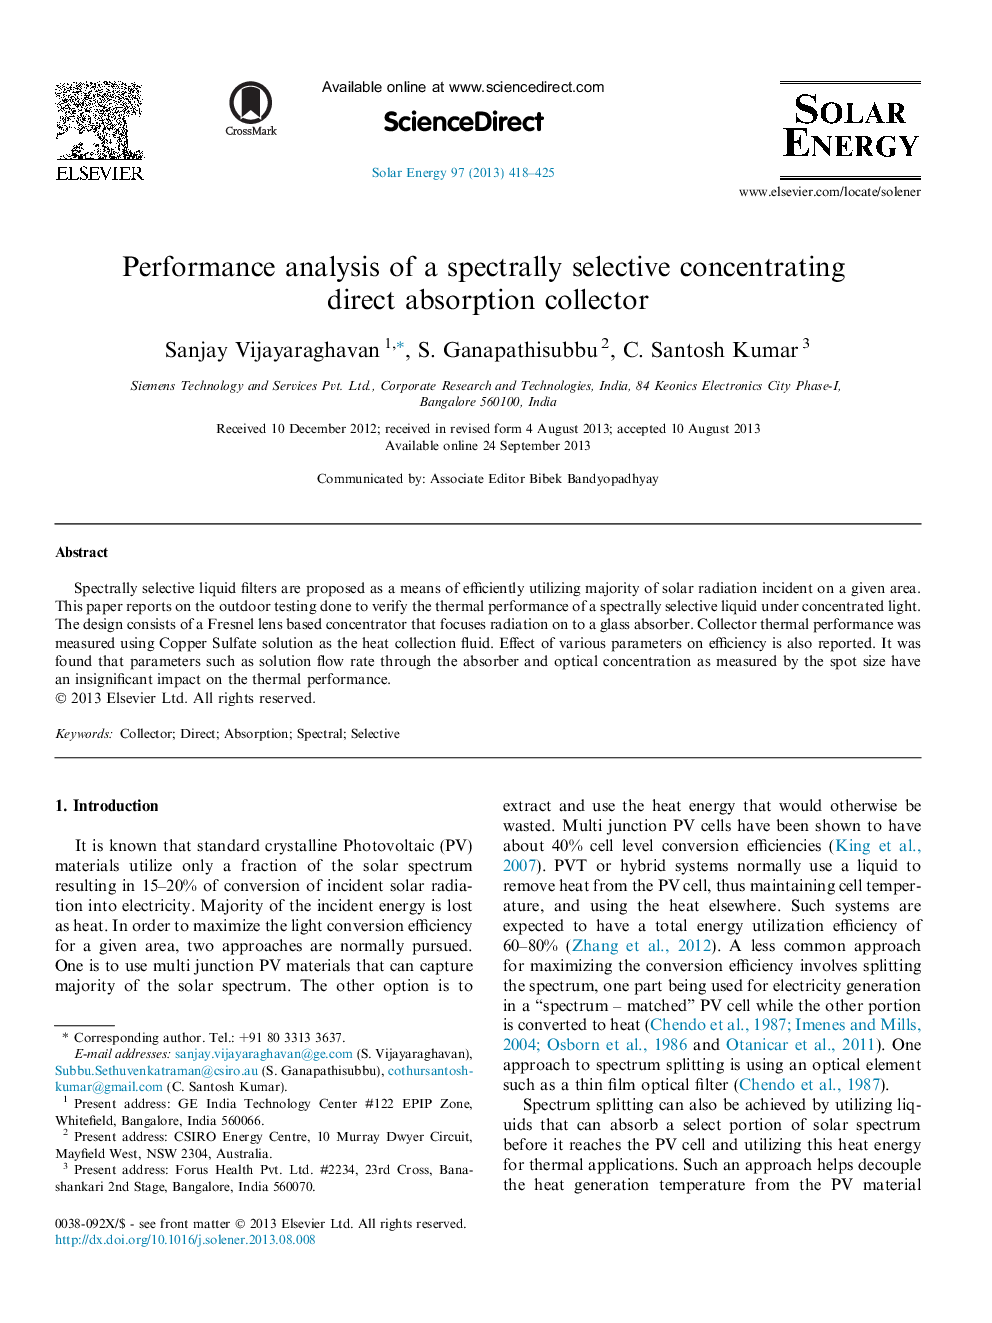 Performance analysis of a spectrally selective concentrating direct absorption collector